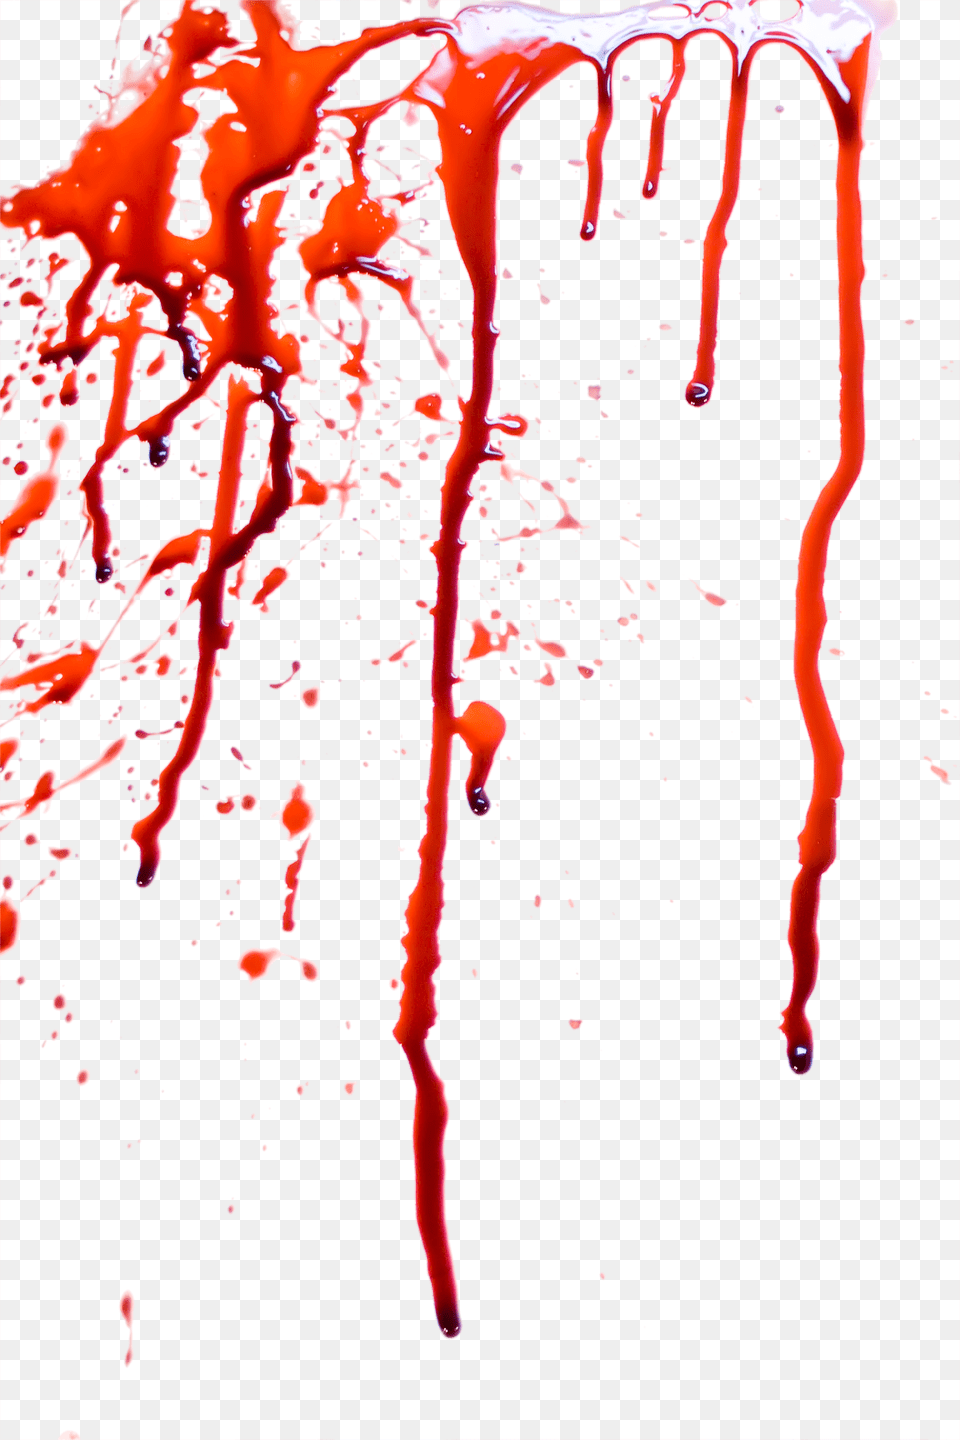 Blood Image Full Hd Text, Stain, Food, Ketchup Png